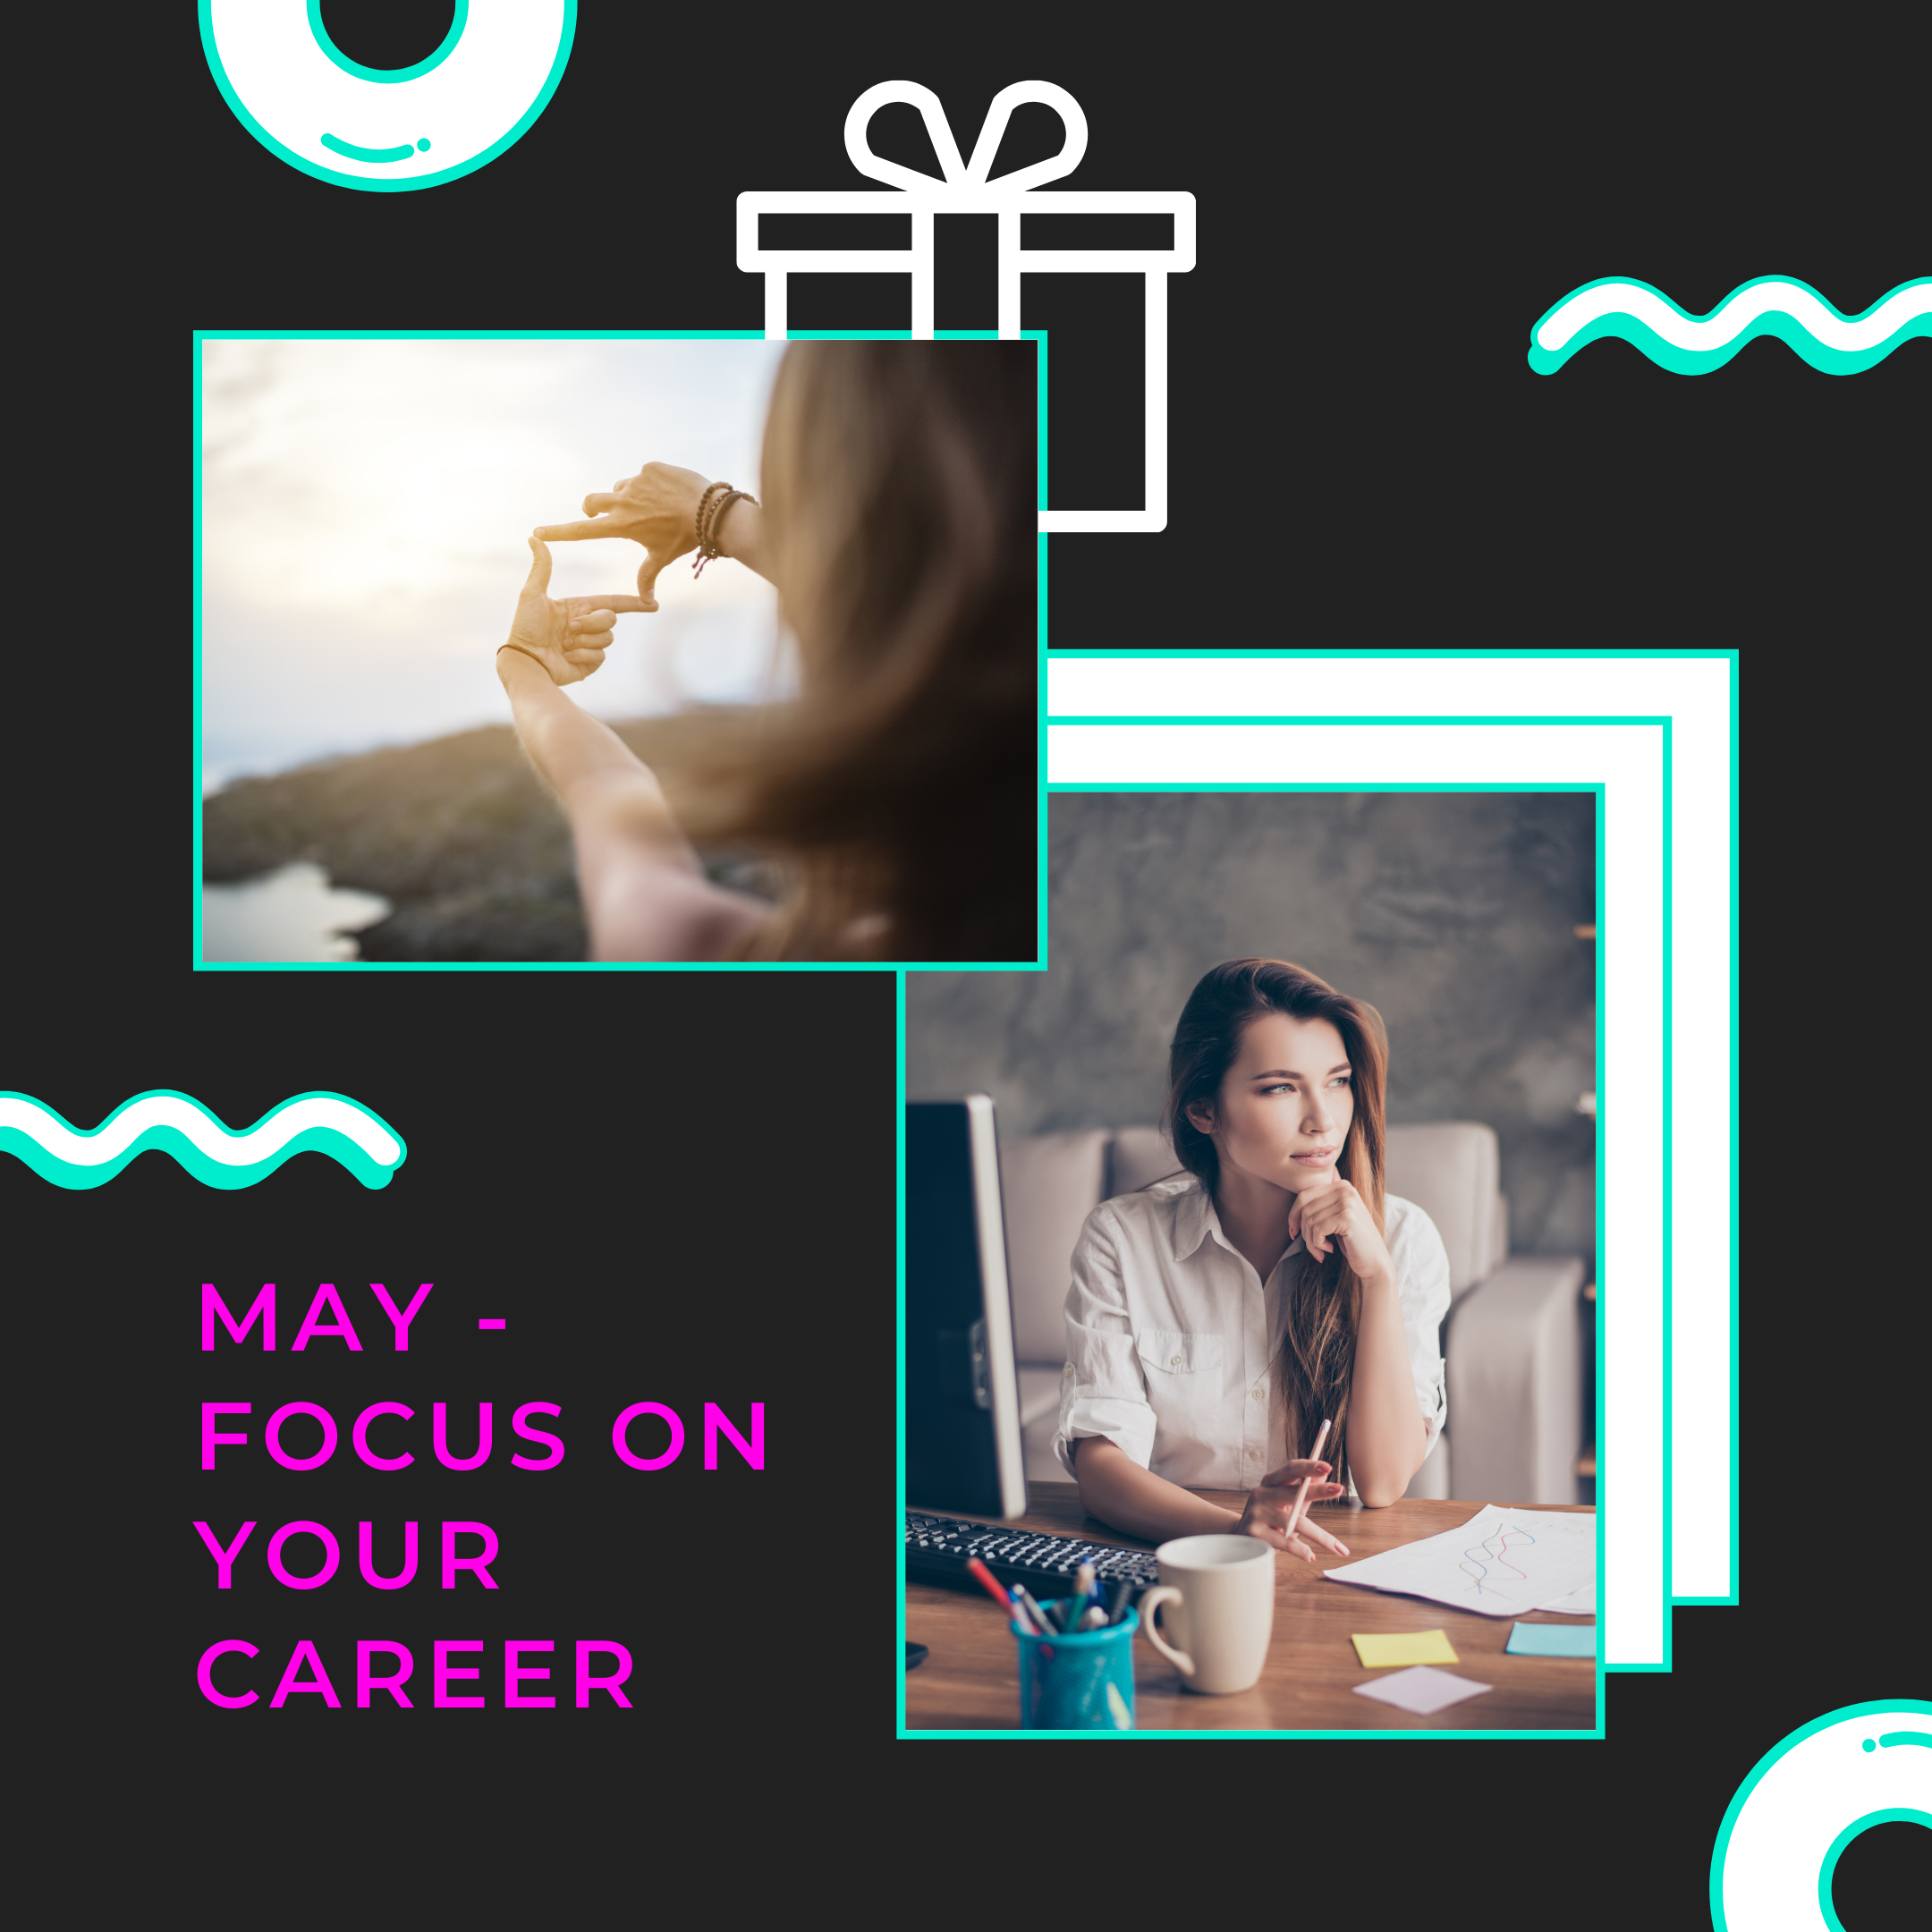 Focus on your Career in May